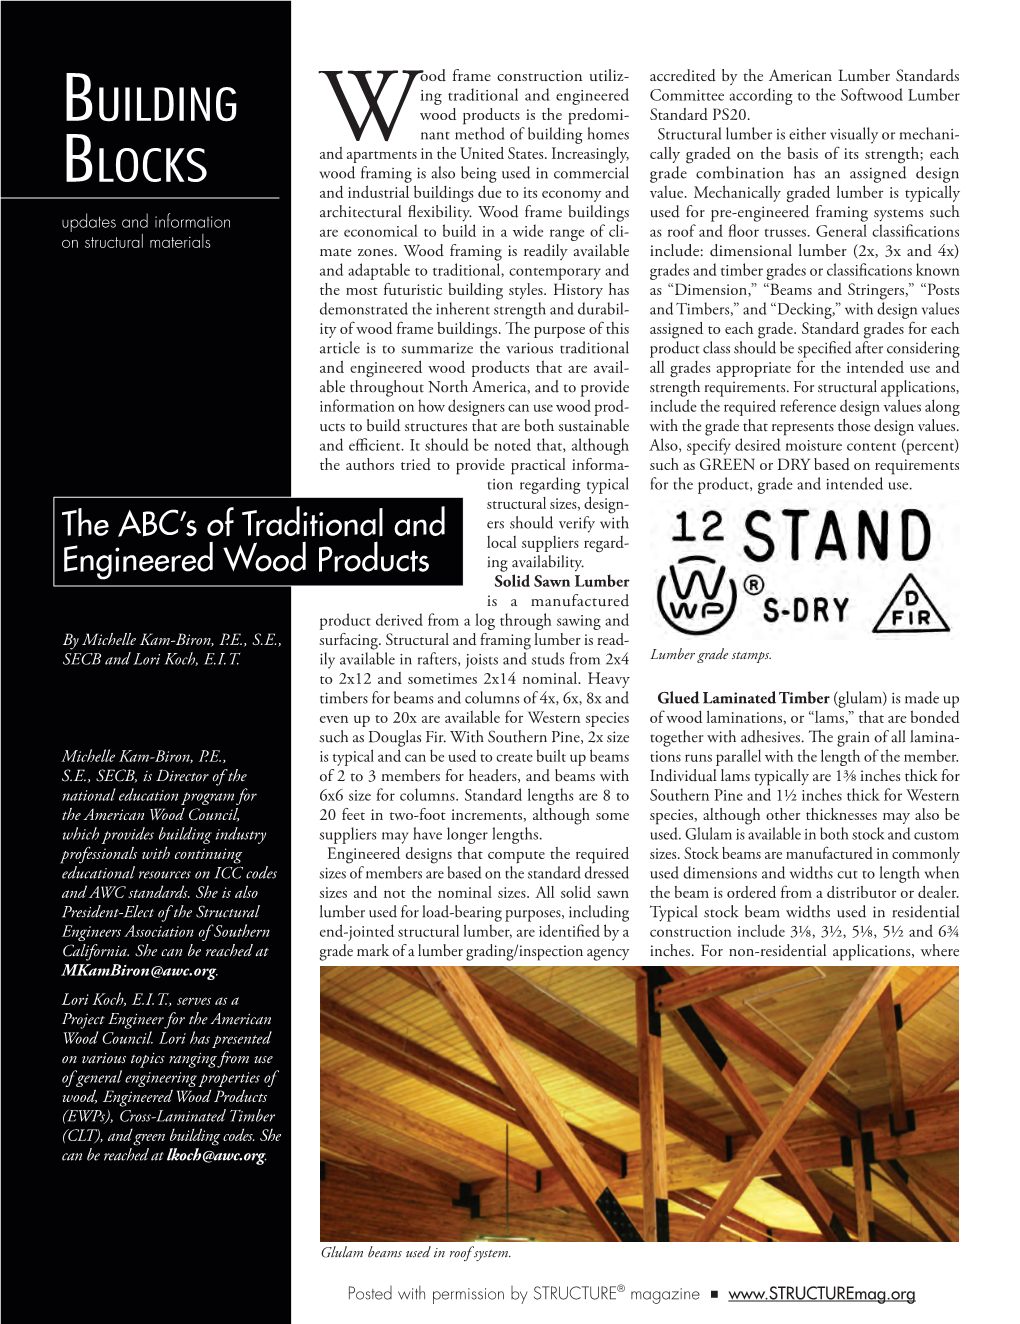 The ABC's of Traditional and Engineered Wood Products